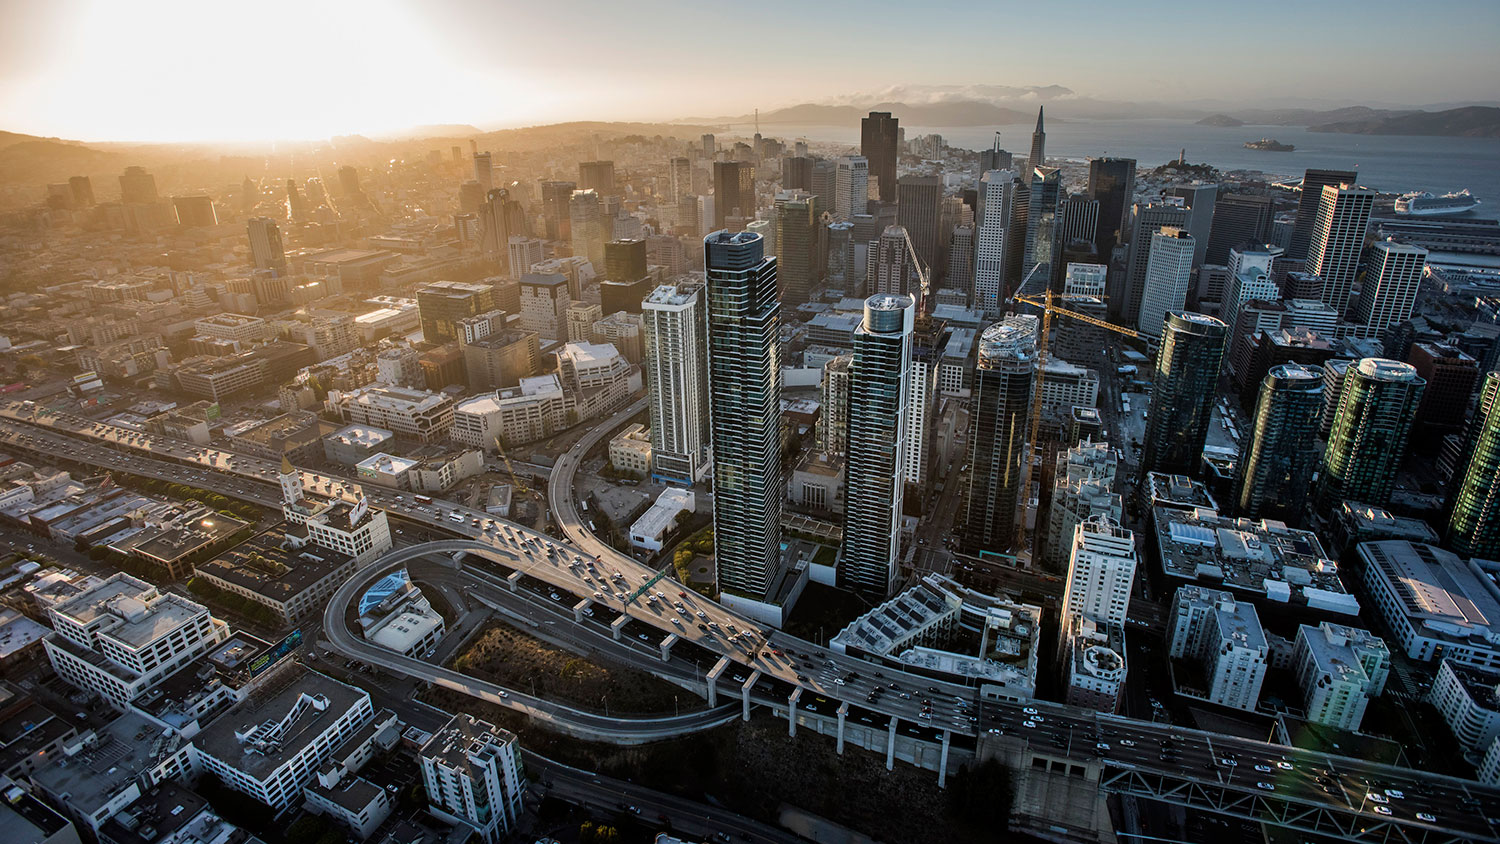 Buildings stand in the skyline of downtown in this aerial photograph taken above San Francisco on Oct. 5, 2015.
